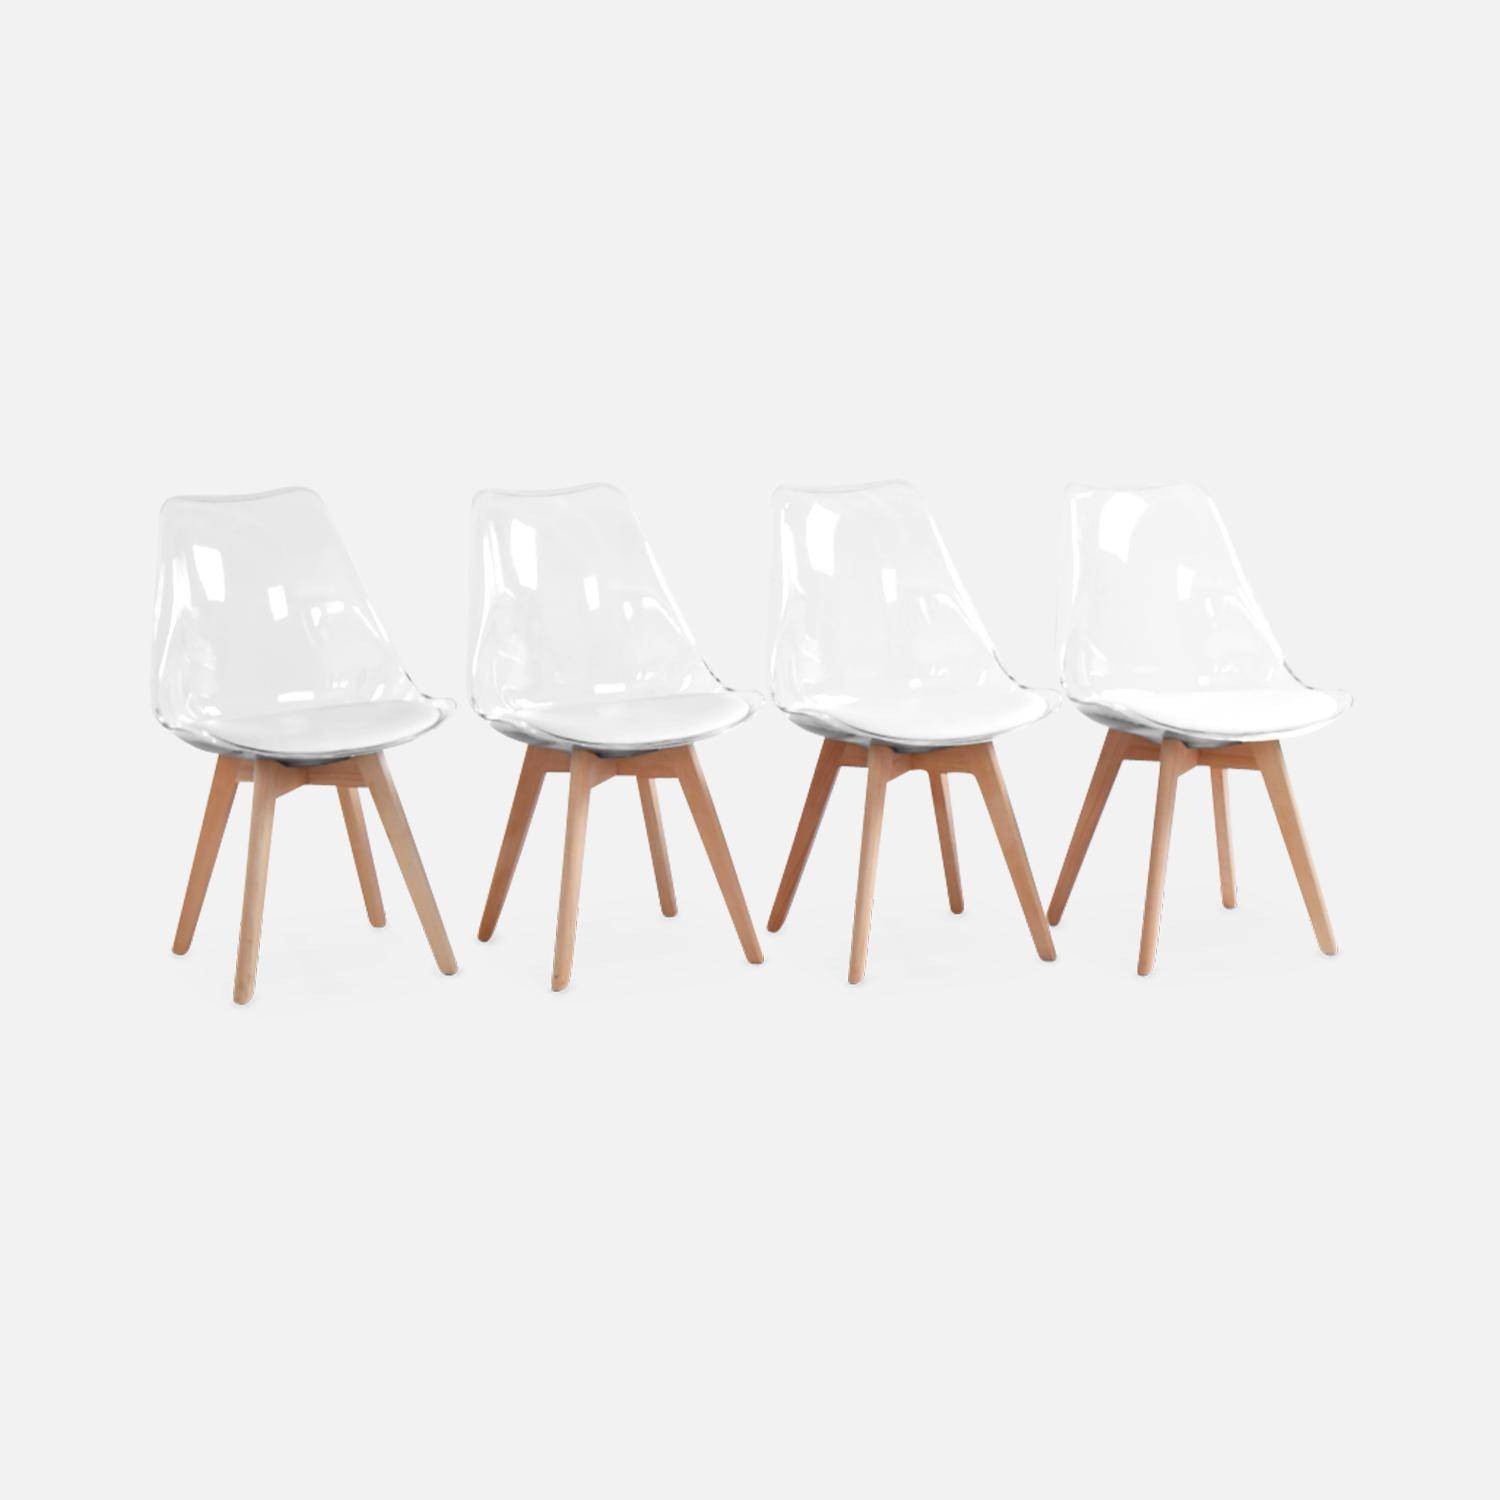 Set of 4 Scandi-style dining chairs with wooden legs, 100% leather cushions and acrylic shell - Lagertha - Clear and White Photo3